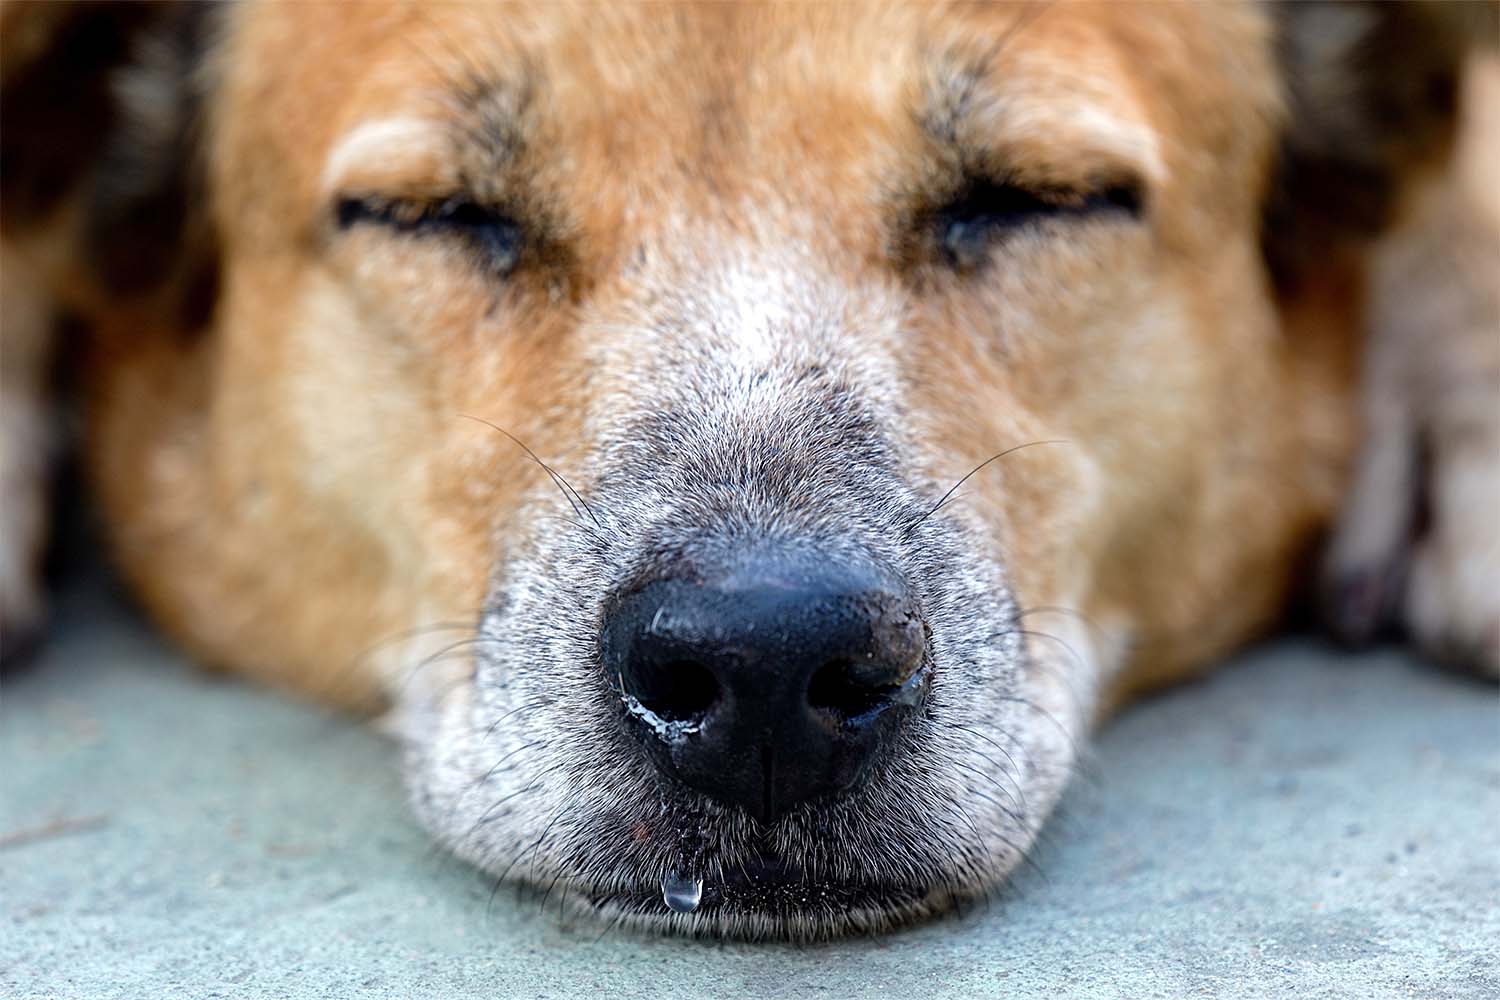 Dog Runny Nose: 7 Specific Symptoms & Their Causes